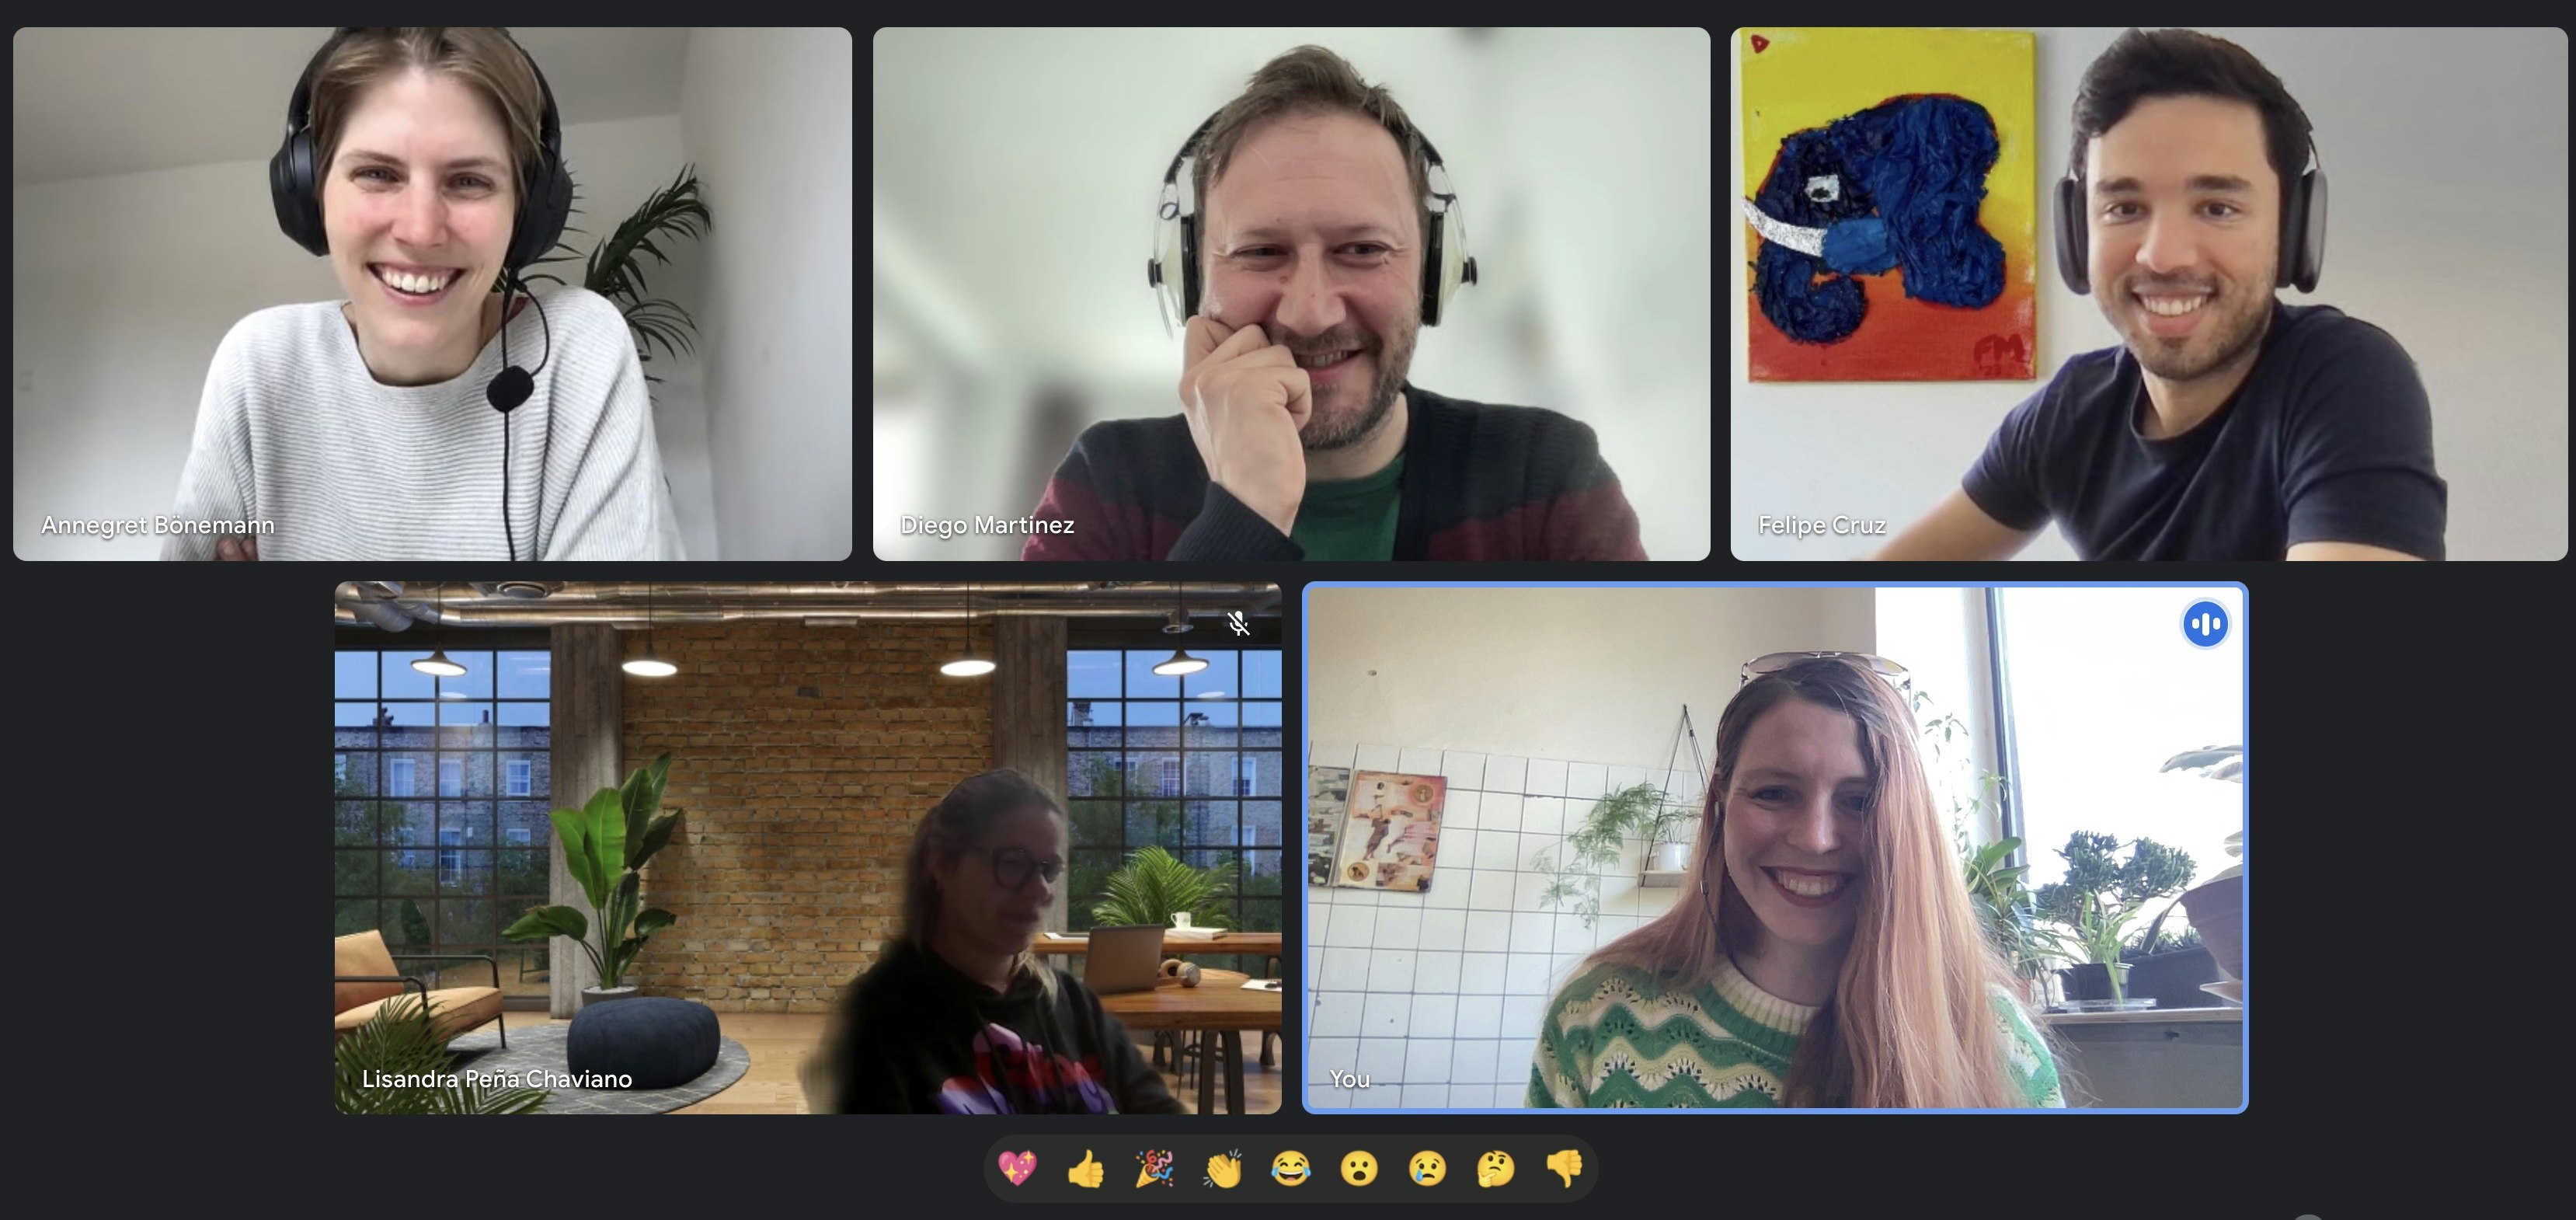 Screenshot from google meet room with 5 people.